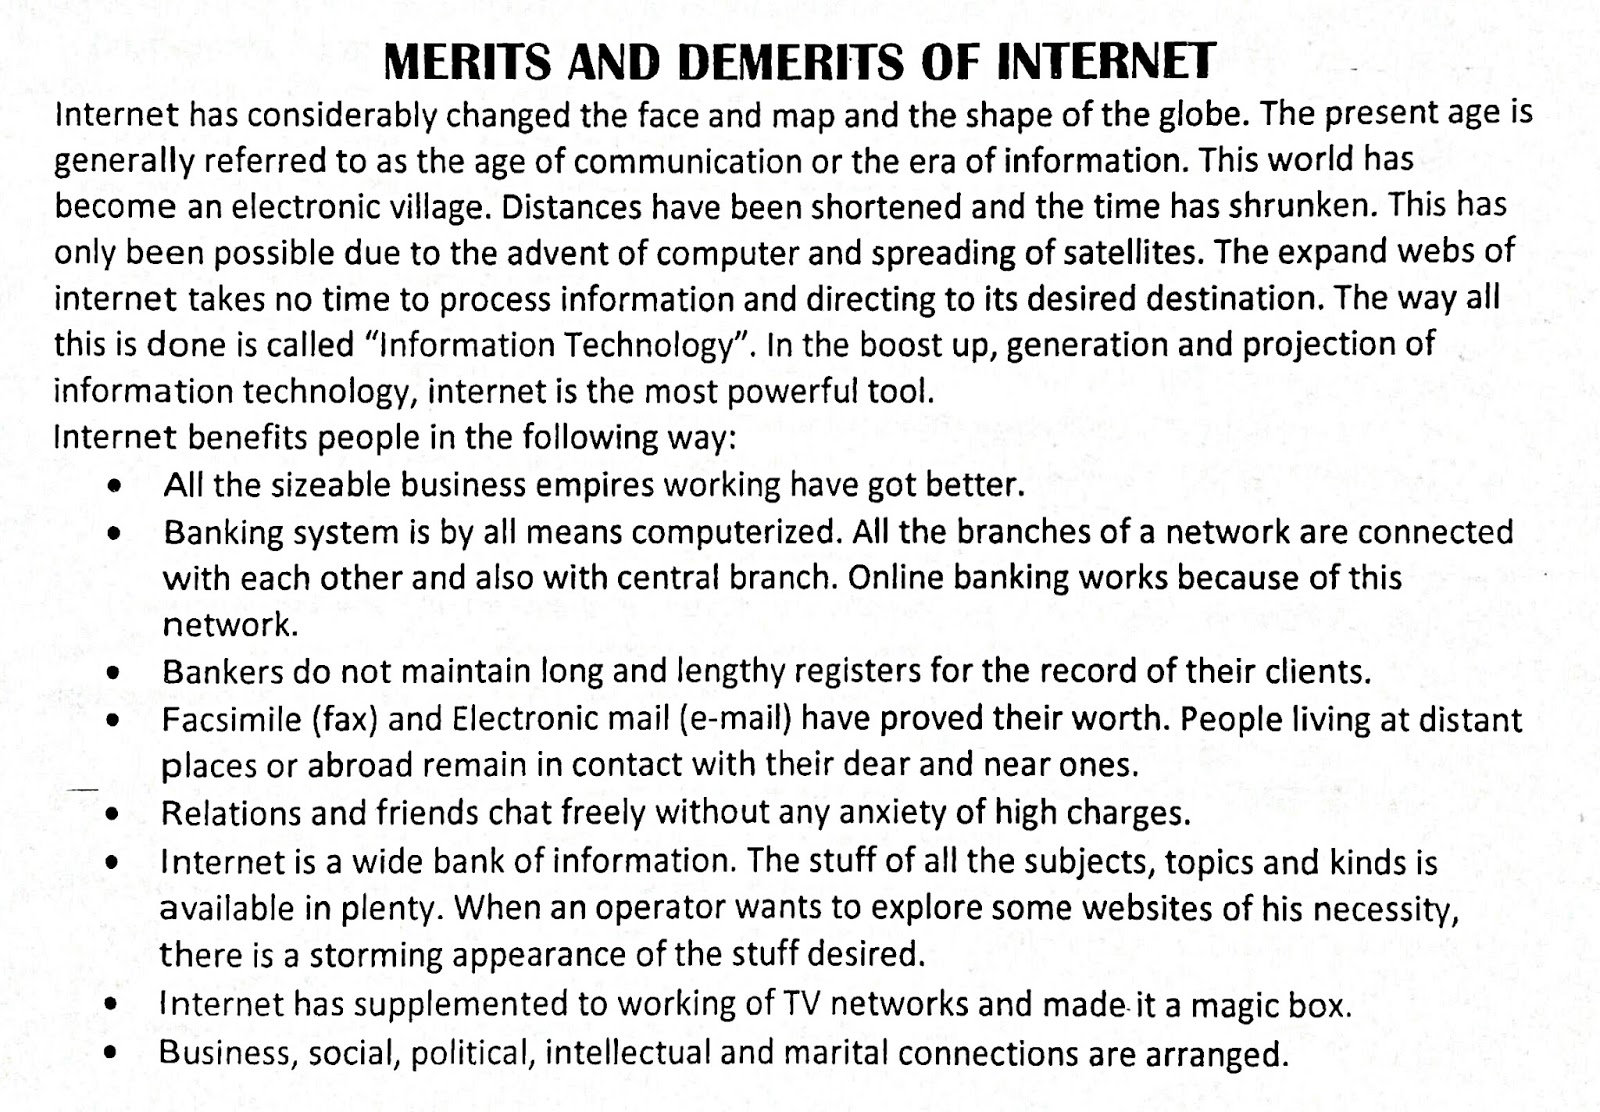 merits and demerits of internet essay in english